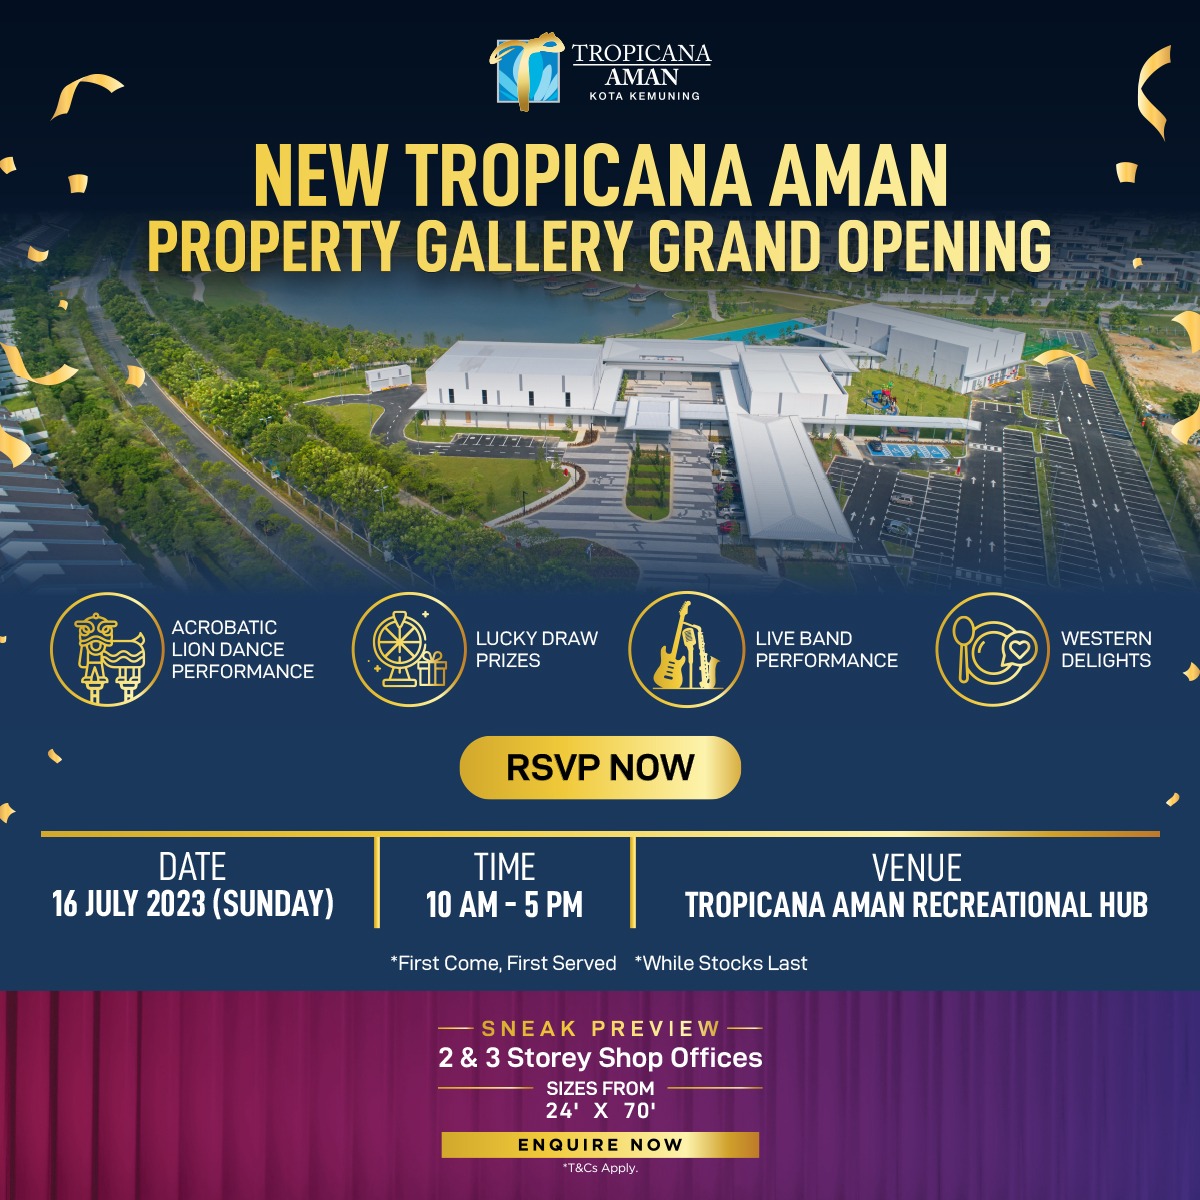 TROPICANA AMAN PROPERTY GALLERY GRAND OPENING